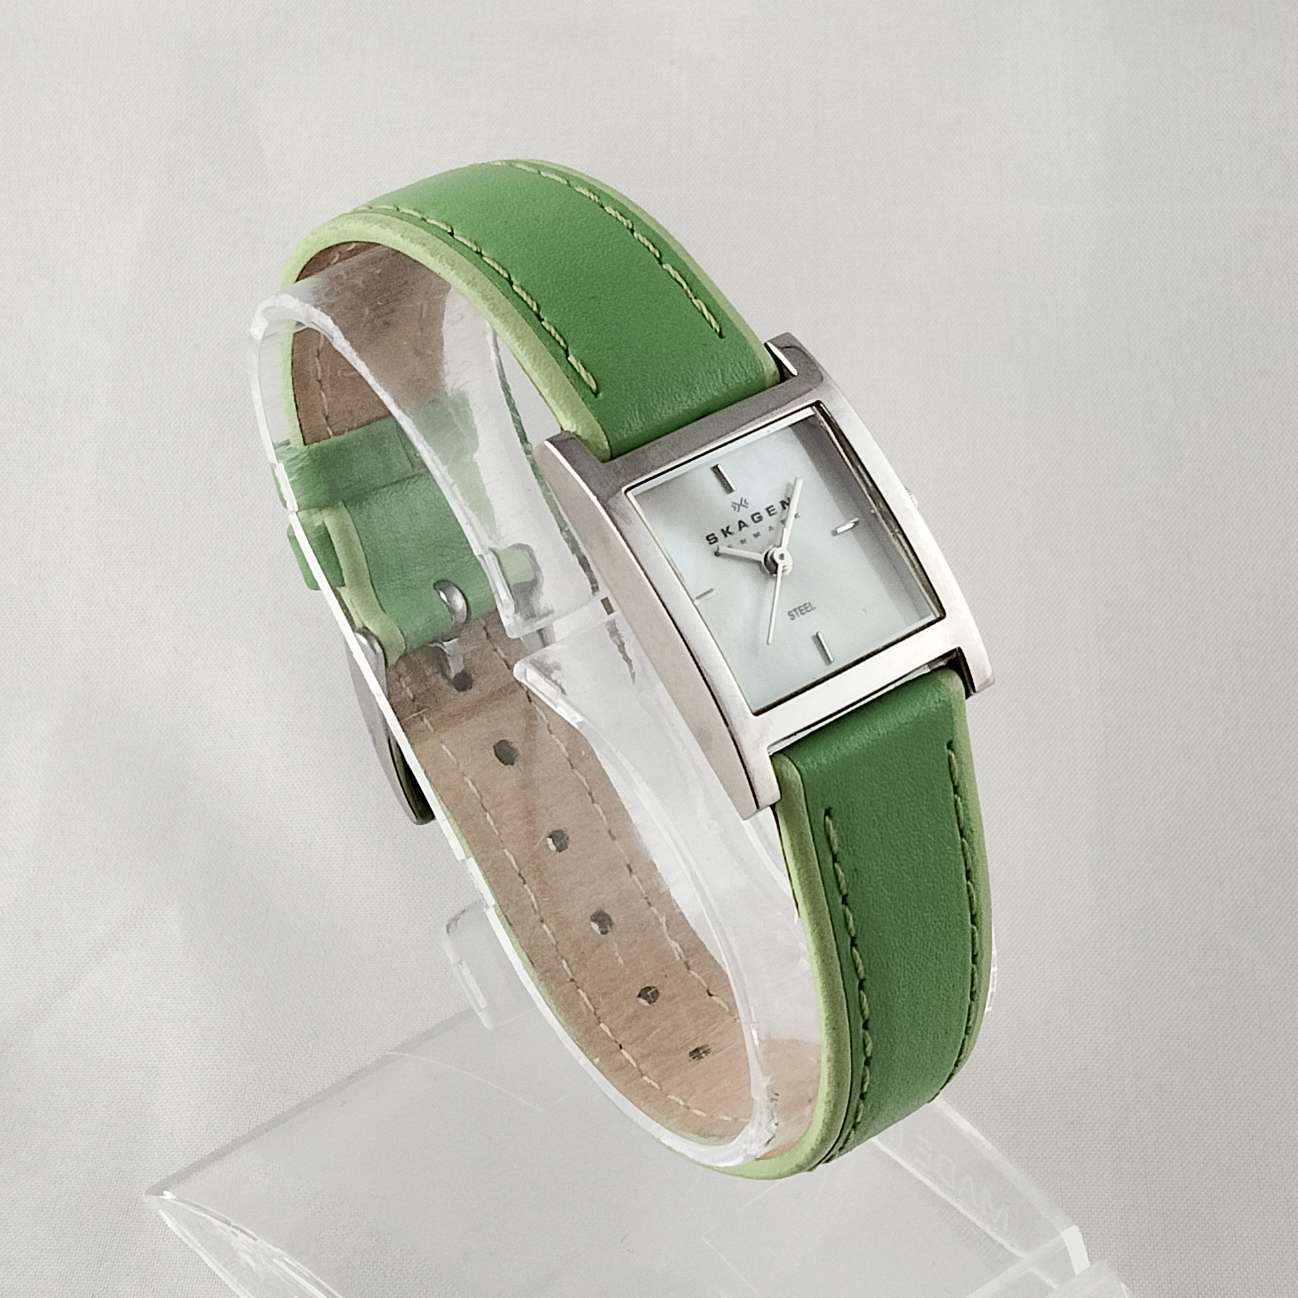 Skagen Unisex Watch, Mother of Pearl Dial, Green Genuine Leather Strap